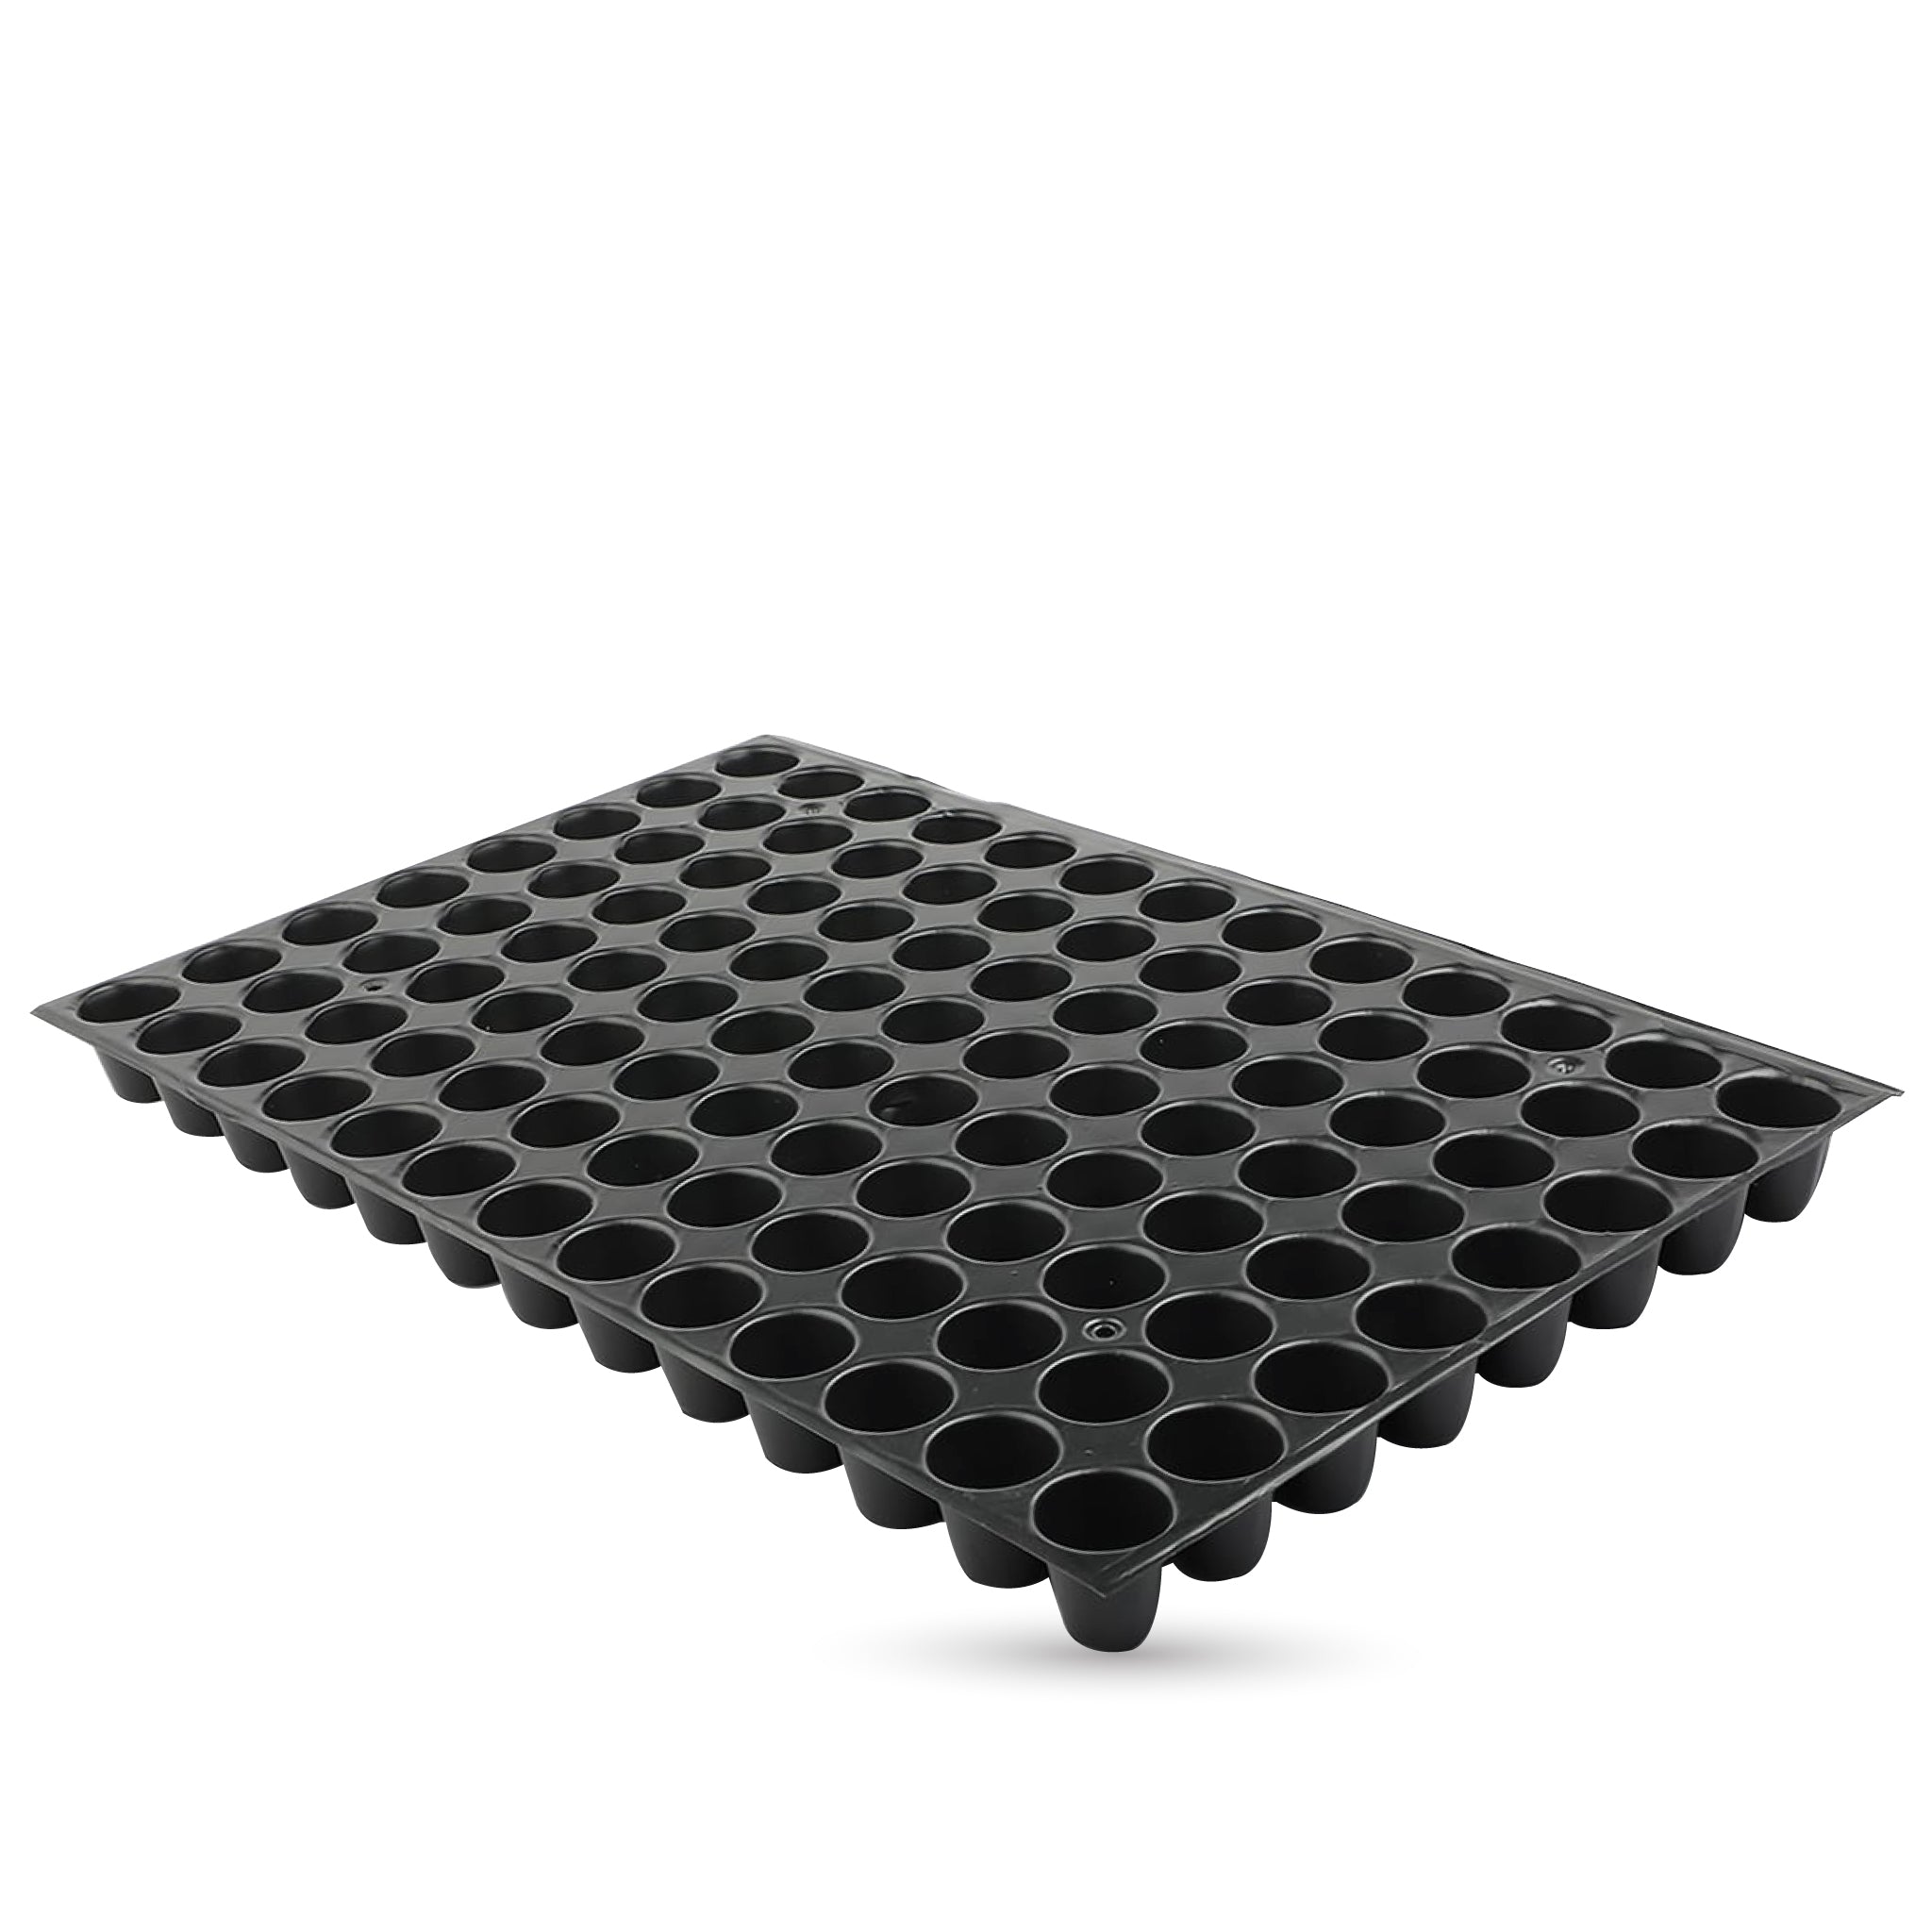 Maximize your planting potential with our sturdy 104 cavity seeding tray